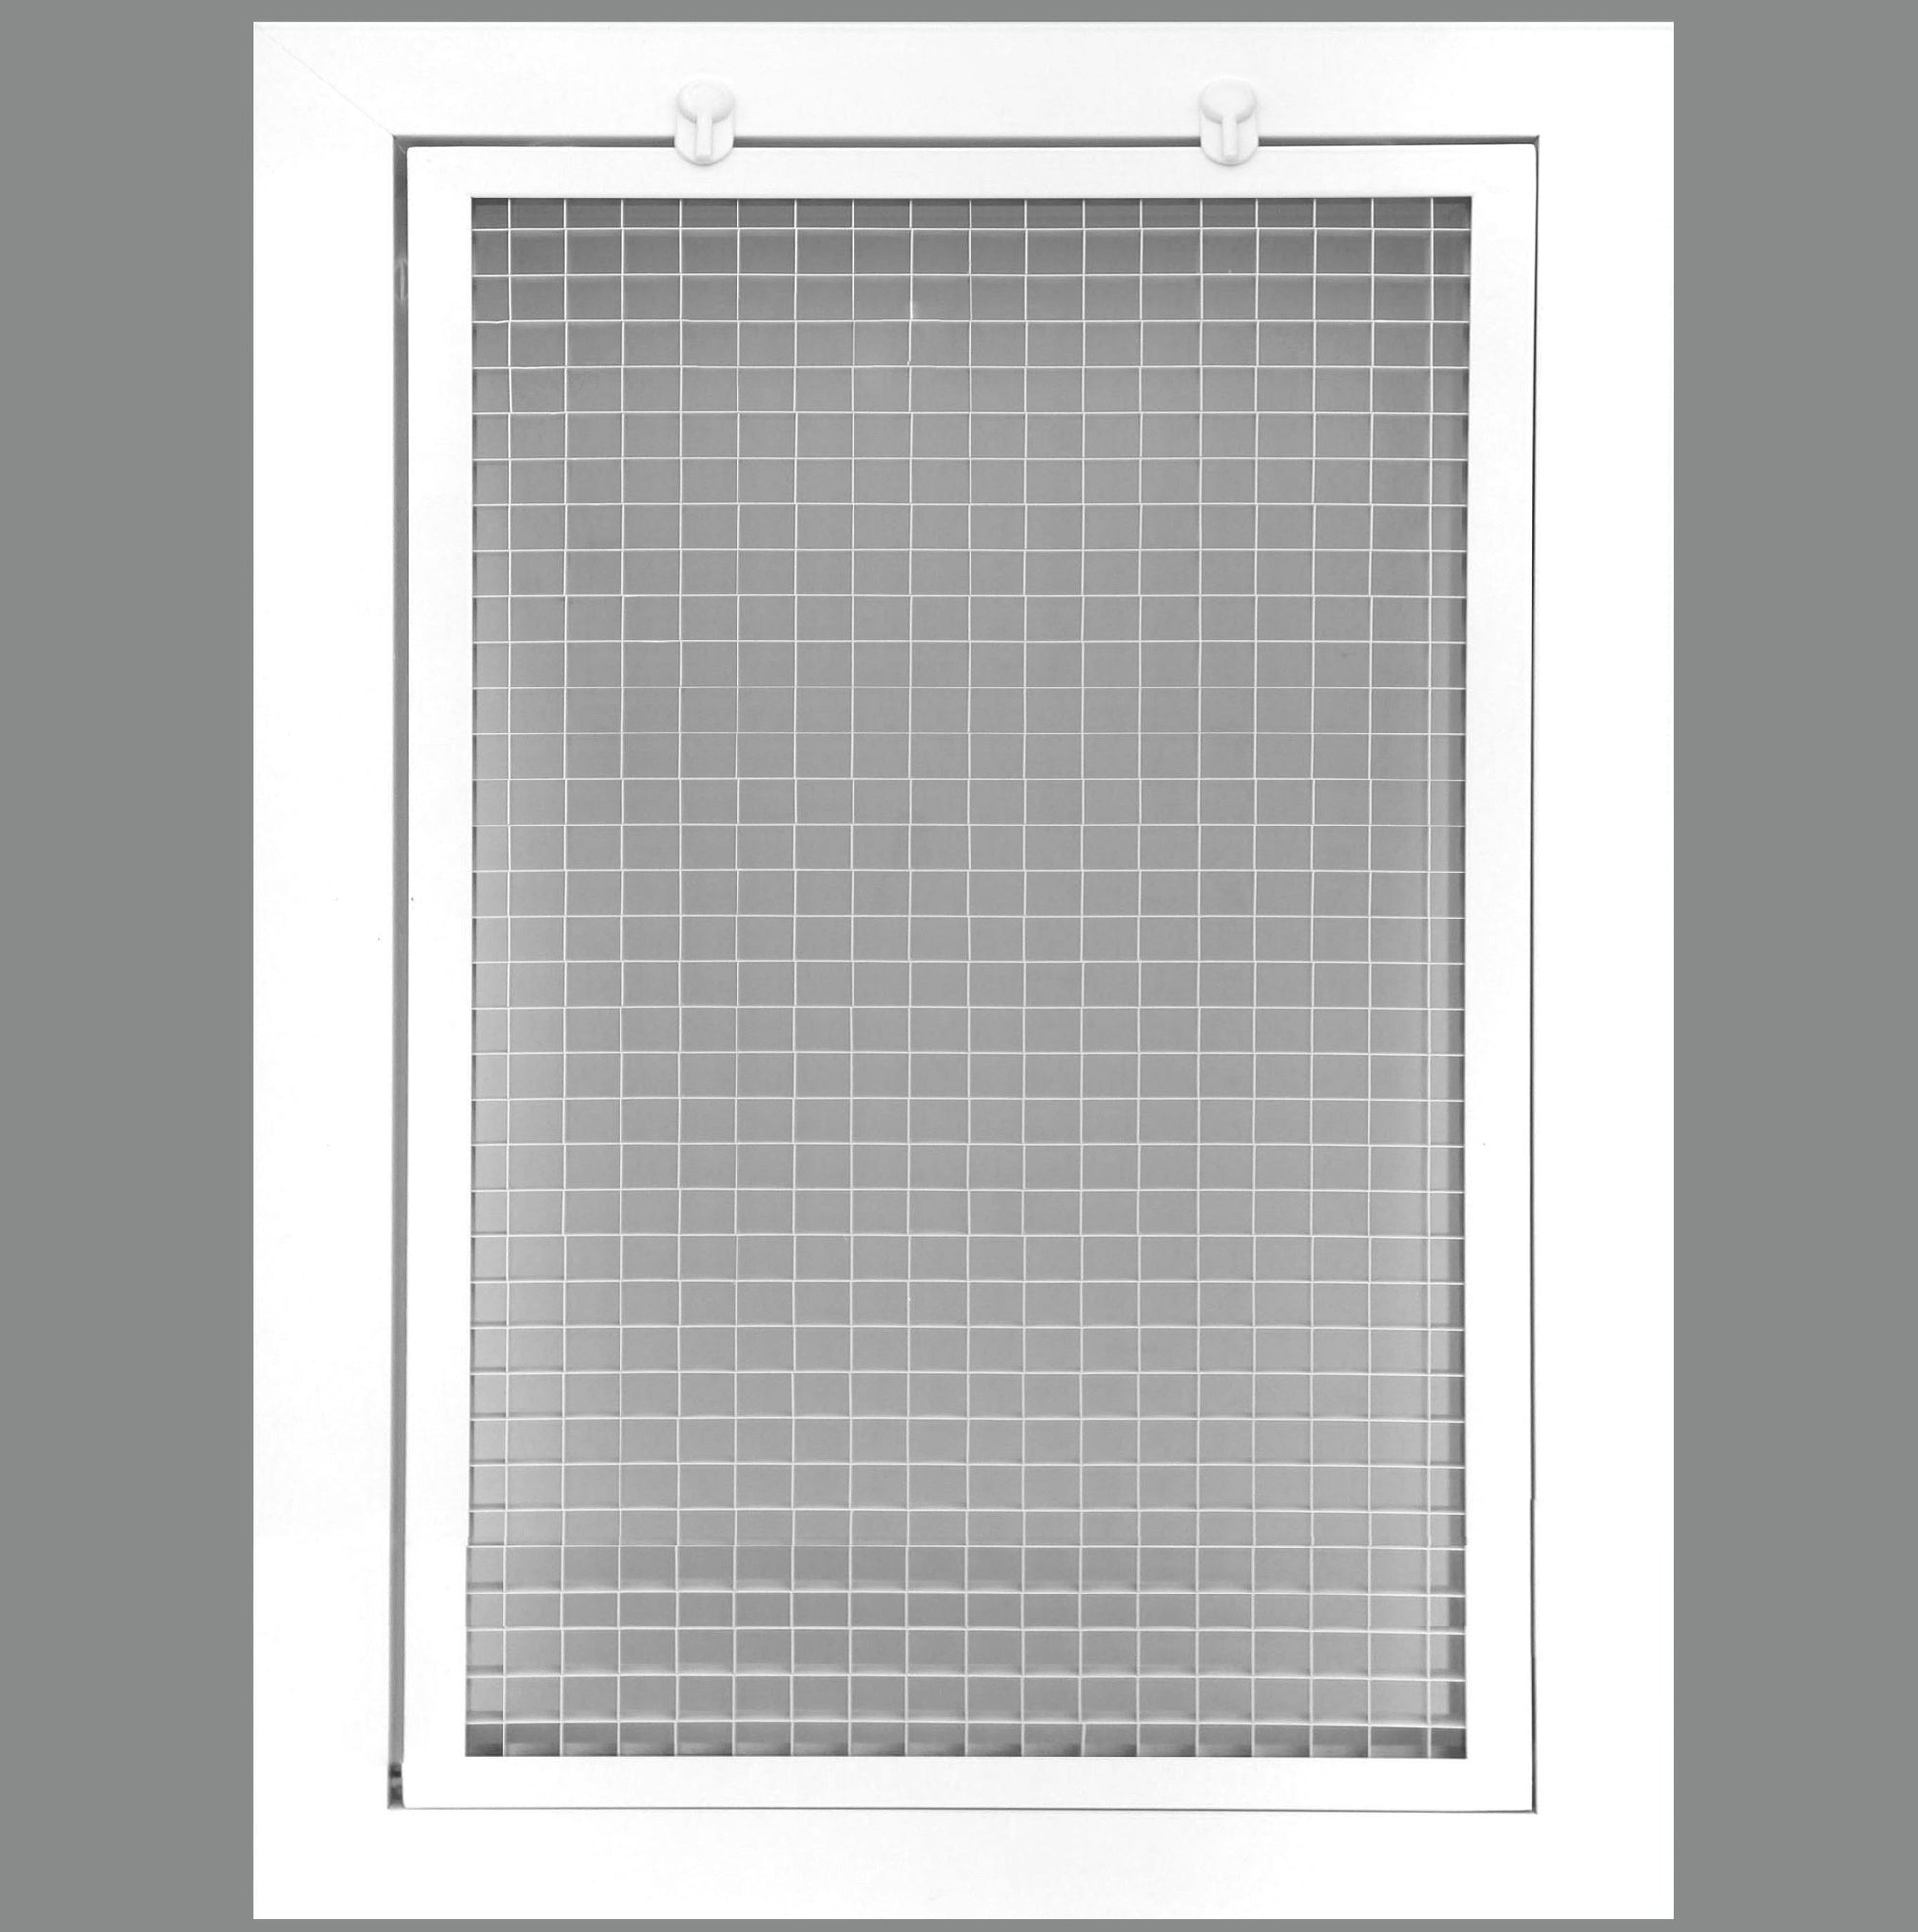 10" x 12" Cube Core Eggcrate Return Air Filter Grille for 1" Filter